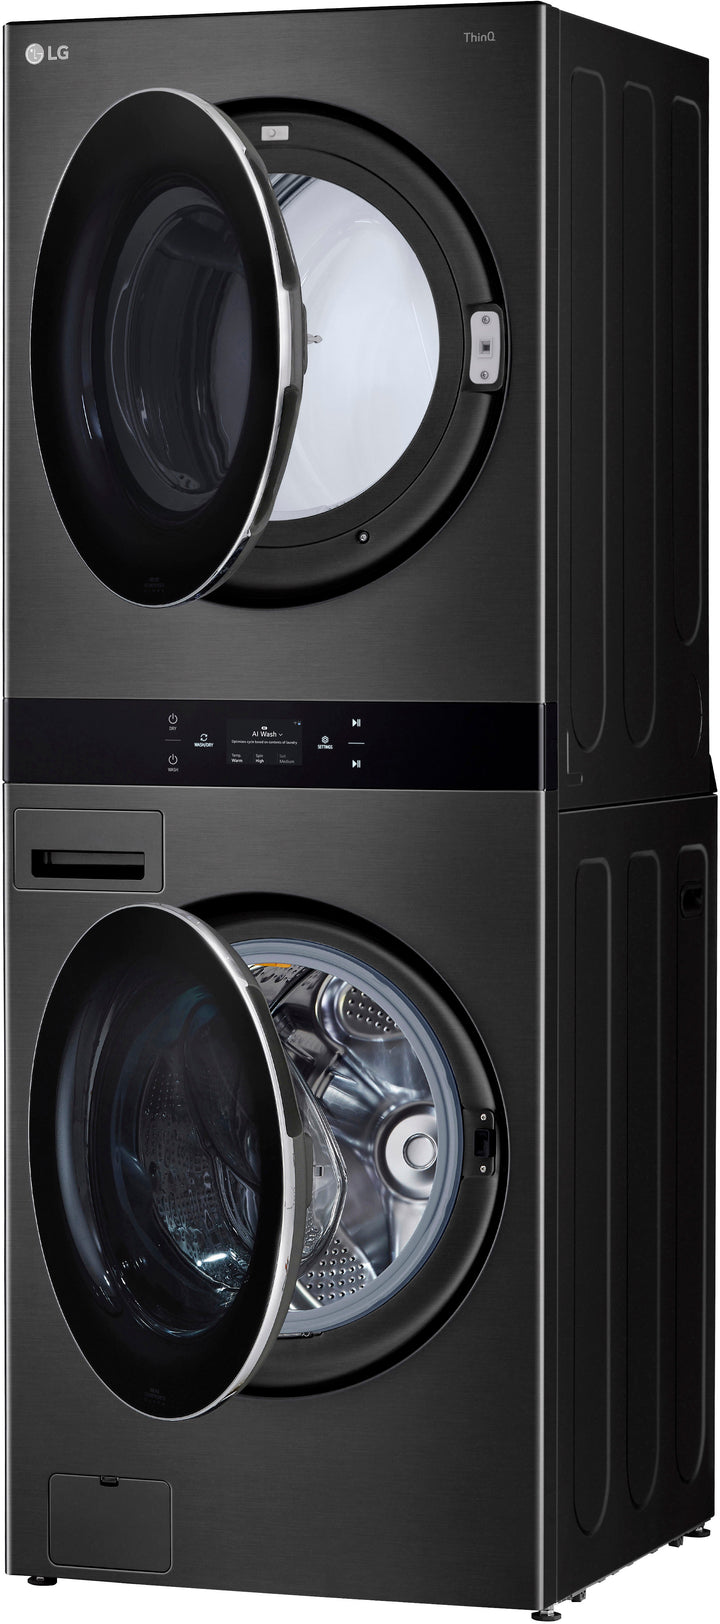 LG - 5.0 Cu. Ft. HE Smart Front Load Washer and 7.4 Cu. Ft. Electric Dryer WashTower with Steam and Center Control - Black Steel_24